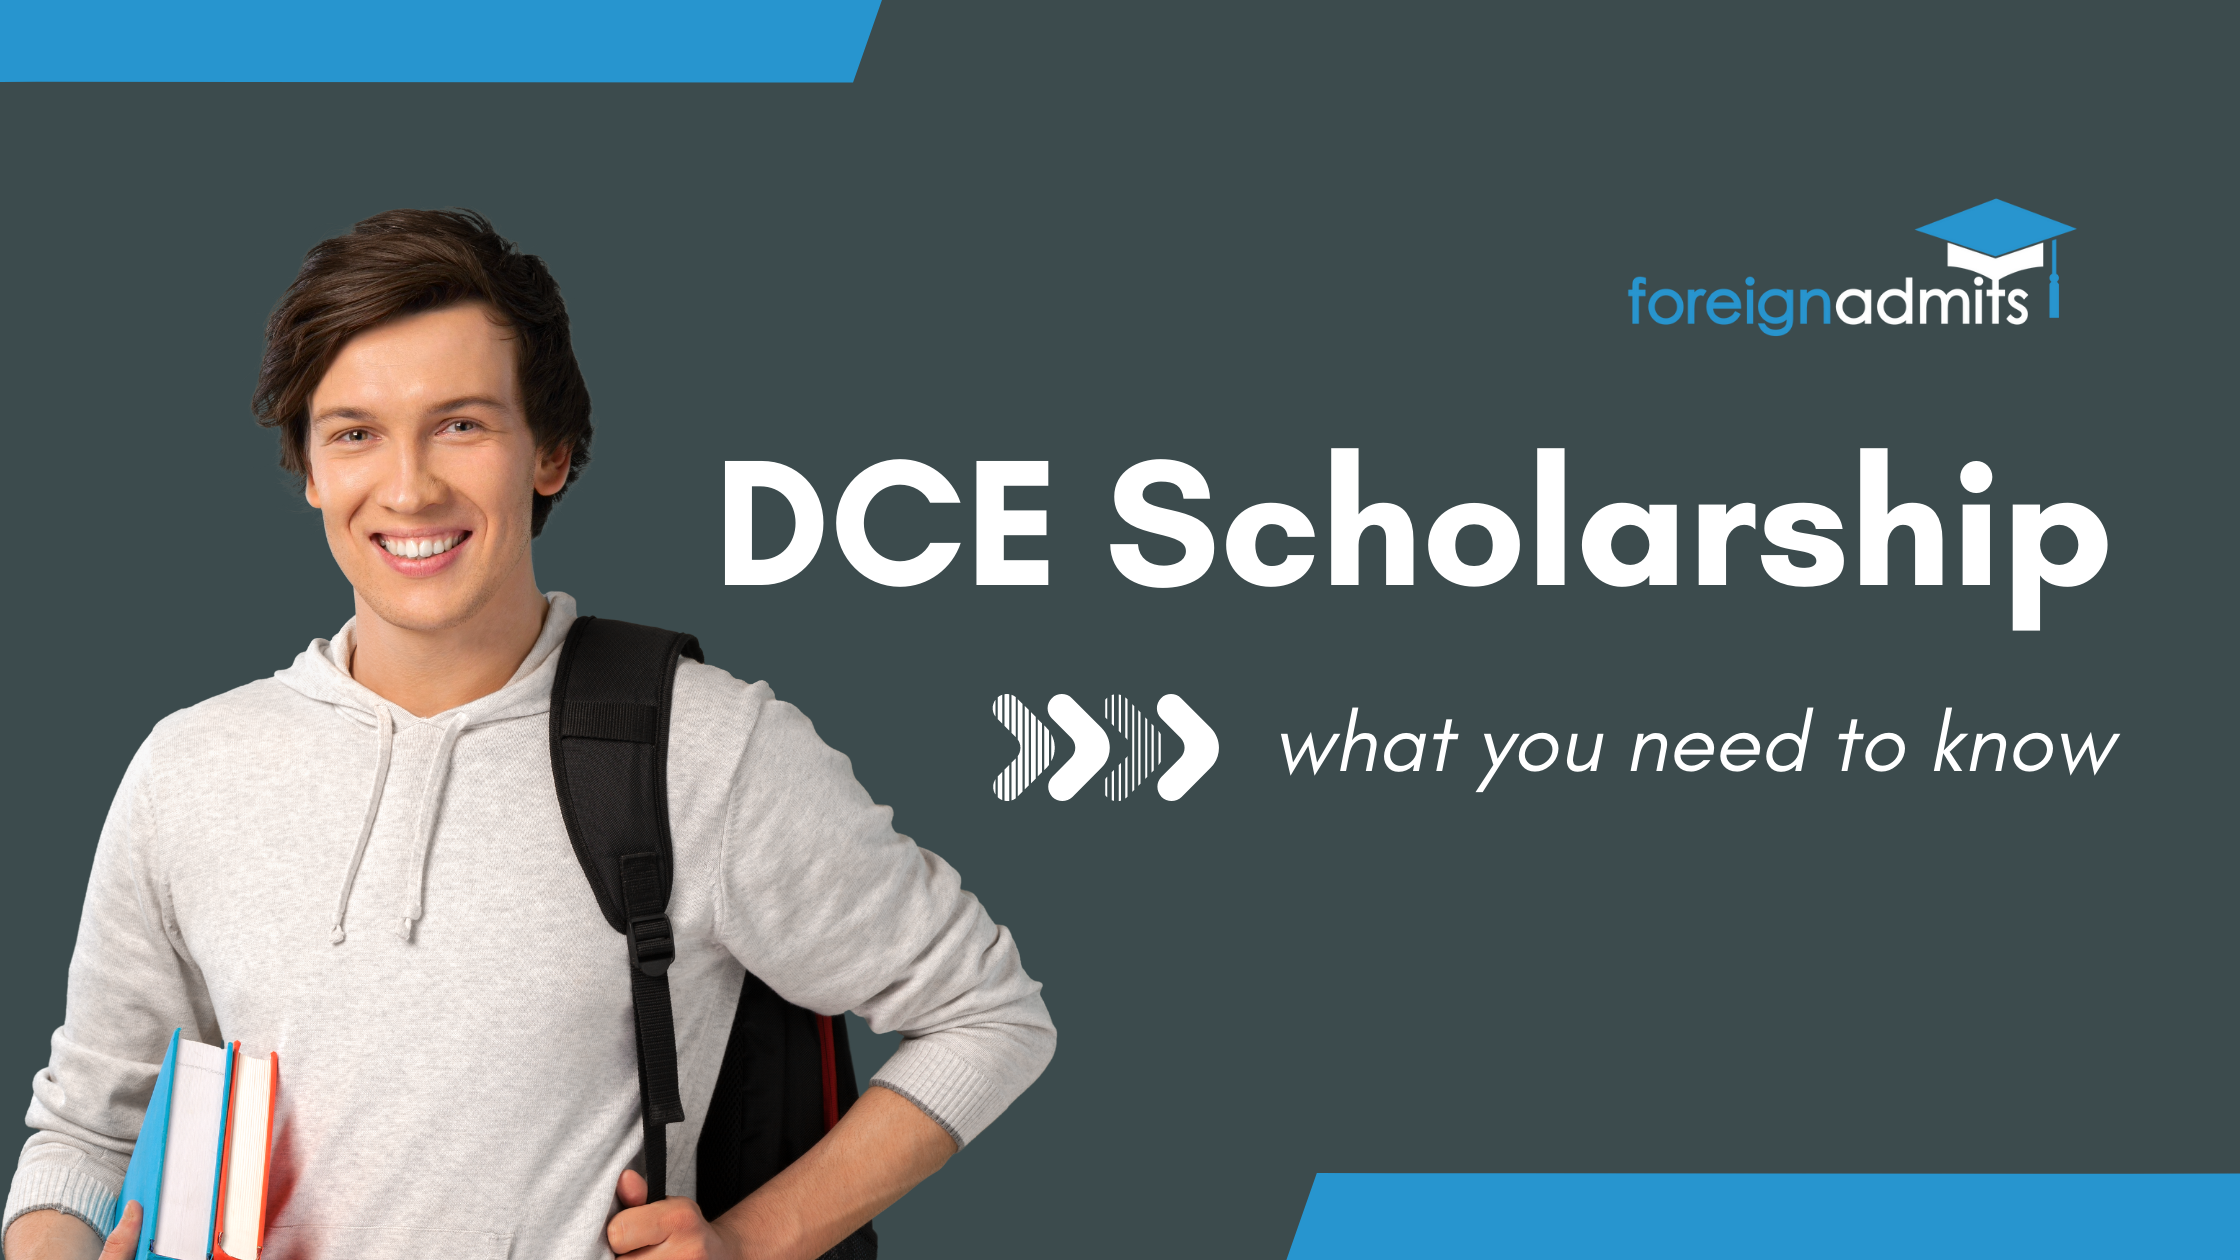 DCE Scholarship – Everything you need to know